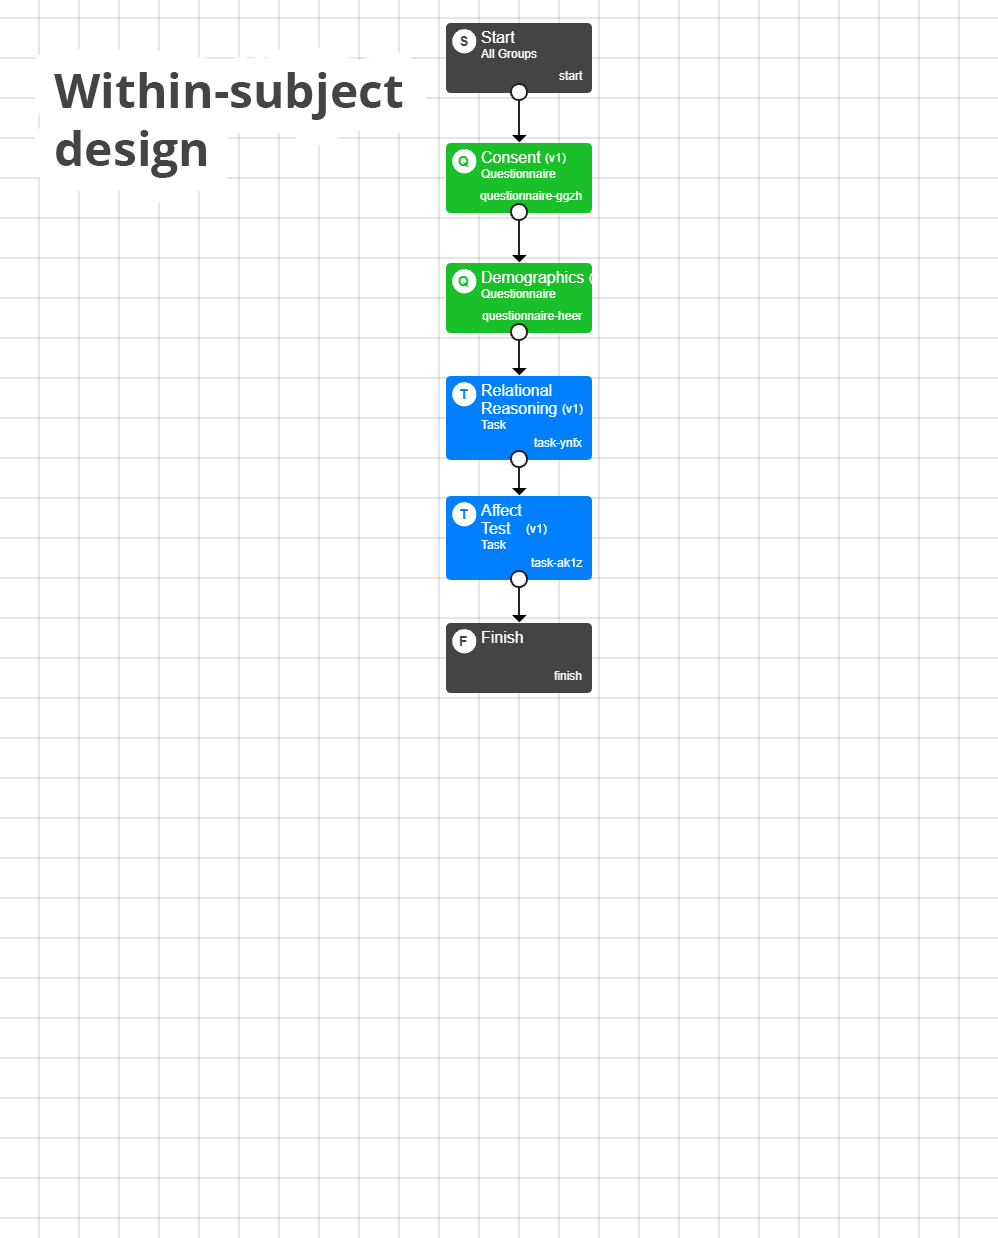 Screenshot of Experiment Builder showing a within-subject design